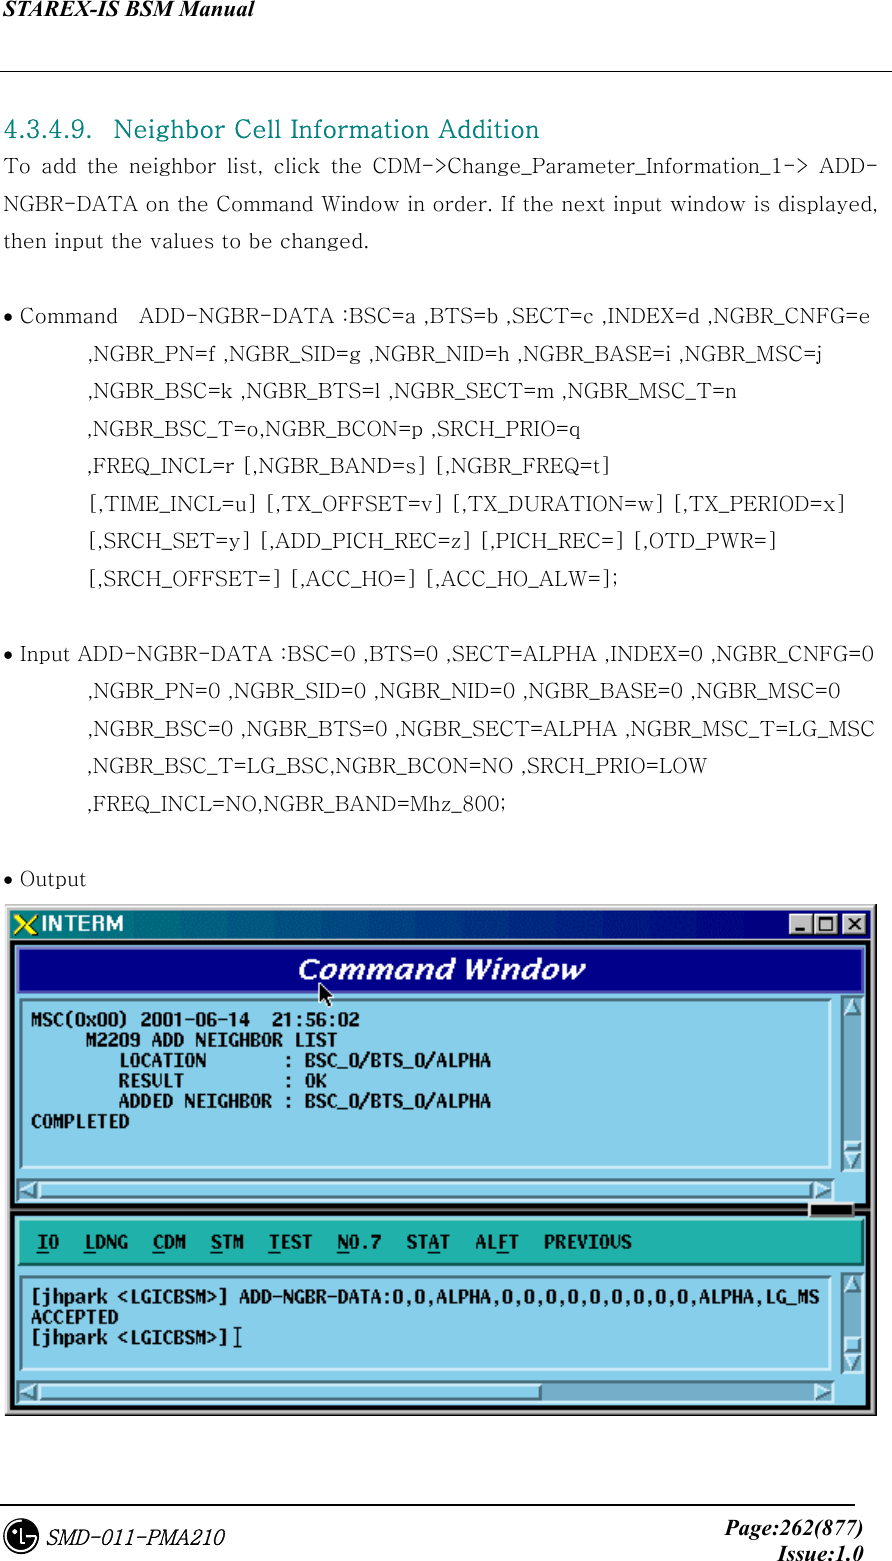 STAREX-IS BSM Manual     Page:262(877)Issue:1.0SMD-011-PMA210  4.3.4.9.   Neighbor Cell Information Addition   To add the neighbor list, click the CDM-&gt;Change_Parameter_Information_1-&gt;  ADD-NGBR-DATA on the Command Window in order. If the next input window is displayed, then input the values to be changed.  • Command    ADD-NGBR-DATA :BSC=a ,BTS=b ,SECT=c ,INDEX=d ,NGBR_CNFG=e         ,NGBR_PN=f ,NGBR_SID=g ,NGBR_NID=h ,NGBR_BASE=i ,NGBR_MSC=j         ,NGBR_BSC=k ,NGBR_BTS=l ,NGBR_SECT=m ,NGBR_MSC_T=n  ,NGBR_BSC_T=o,NGBR_BCON=p ,SRCH_PRIO=q   ,FREQ_INCL=r [,NGBR_BAND=s] [,NGBR_FREQ=t]         [,TIME_INCL=u] [,TX_OFFSET=v] [,TX_DURATION=w] [,TX_PERIOD=x]   [,SRCH_SET=y] [,ADD_PICH_REC=z] [,PICH_REC=] [,OTD_PWR=]   [,SRCH_OFFSET=] [,ACC_HO=] [,ACC_HO_ALW=];  • Input ADD-NGBR-DATA :BSC=0 ,BTS=0 ,SECT=ALPHA ,INDEX=0 ,NGBR_CNFG=0         ,NGBR_PN=0 ,NGBR_SID=0 ,NGBR_NID=0 ,NGBR_BASE=0 ,NGBR_MSC=0         ,NGBR_BSC=0 ,NGBR_BTS=0 ,NGBR_SECT=ALPHA ,NGBR_MSC_T=LG_MSC   ,NGBR_BSC_T=LG_BSC,NGBR_BCON=NO ,SRCH_PRIO=LOW   ,FREQ_INCL=NO,NGBR_BAND=Mhz_800;  • Output  